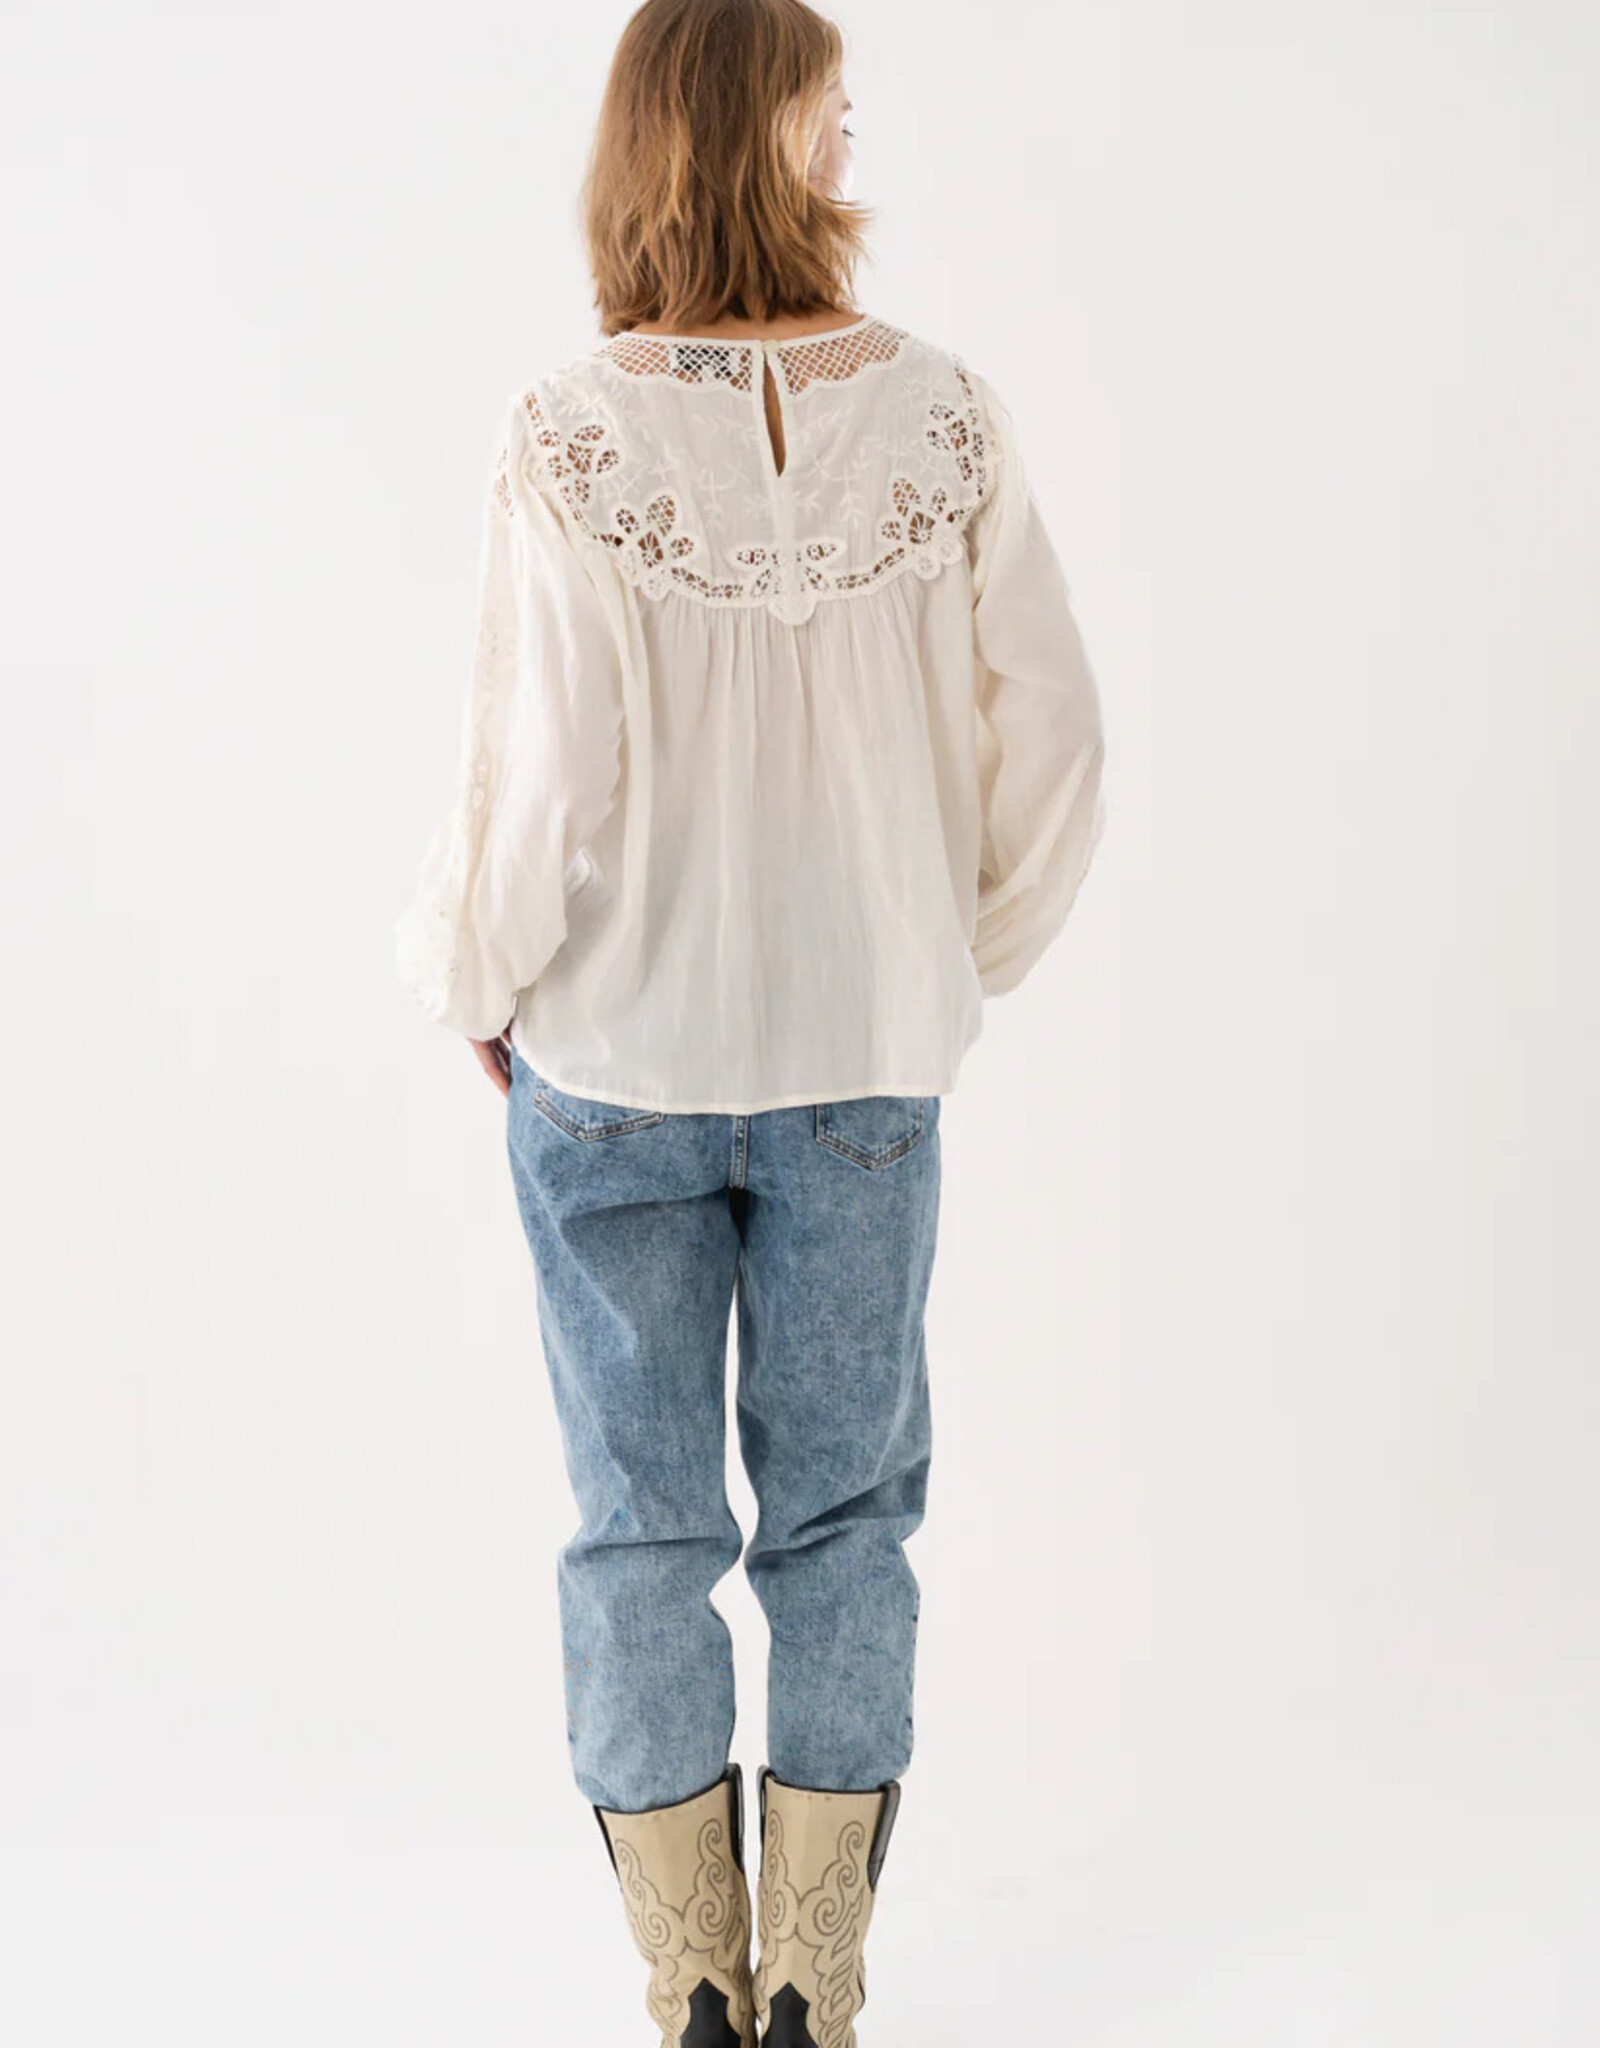 Lollys Laundry Blouse 'May' - Creme - Lollys Laundry